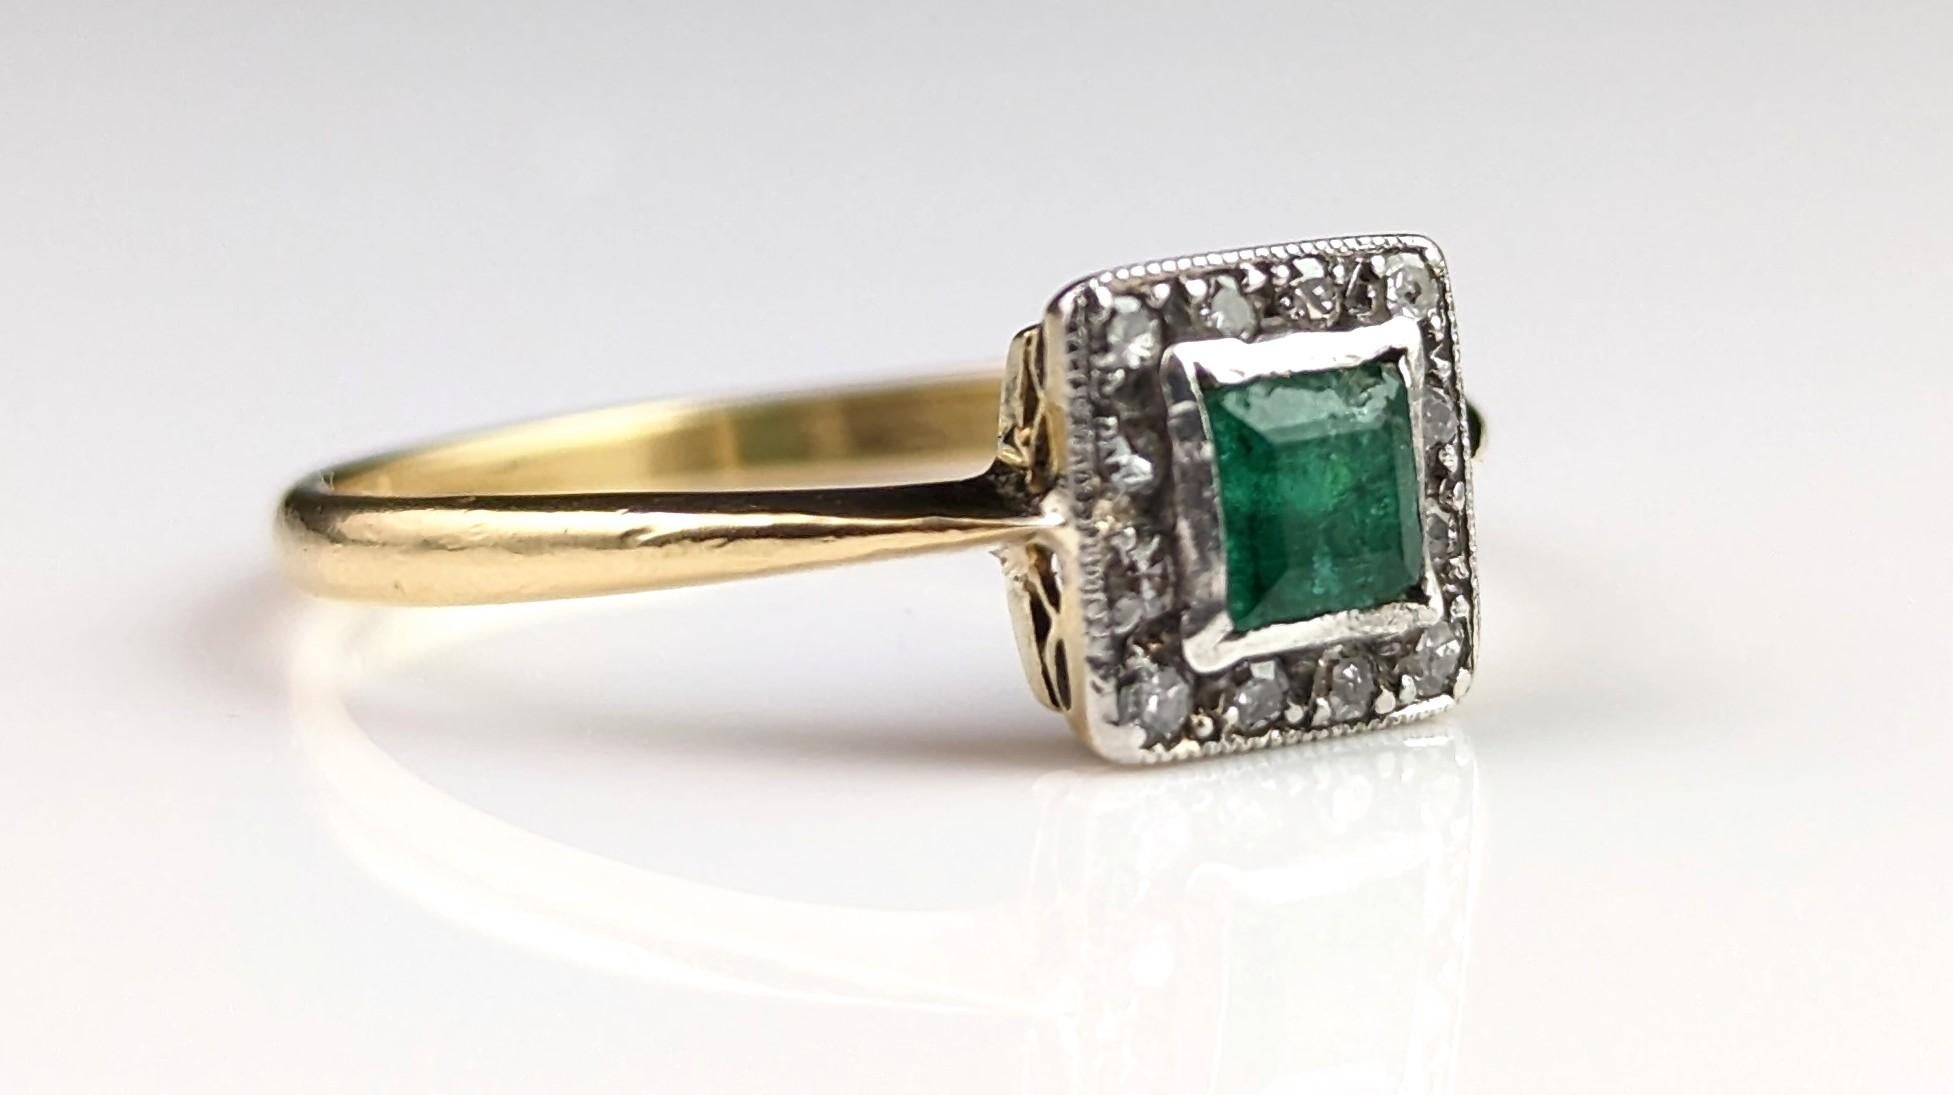 Vintage Art Deco Emerald and Diamond Ring, 18k Gold and Platinum 10